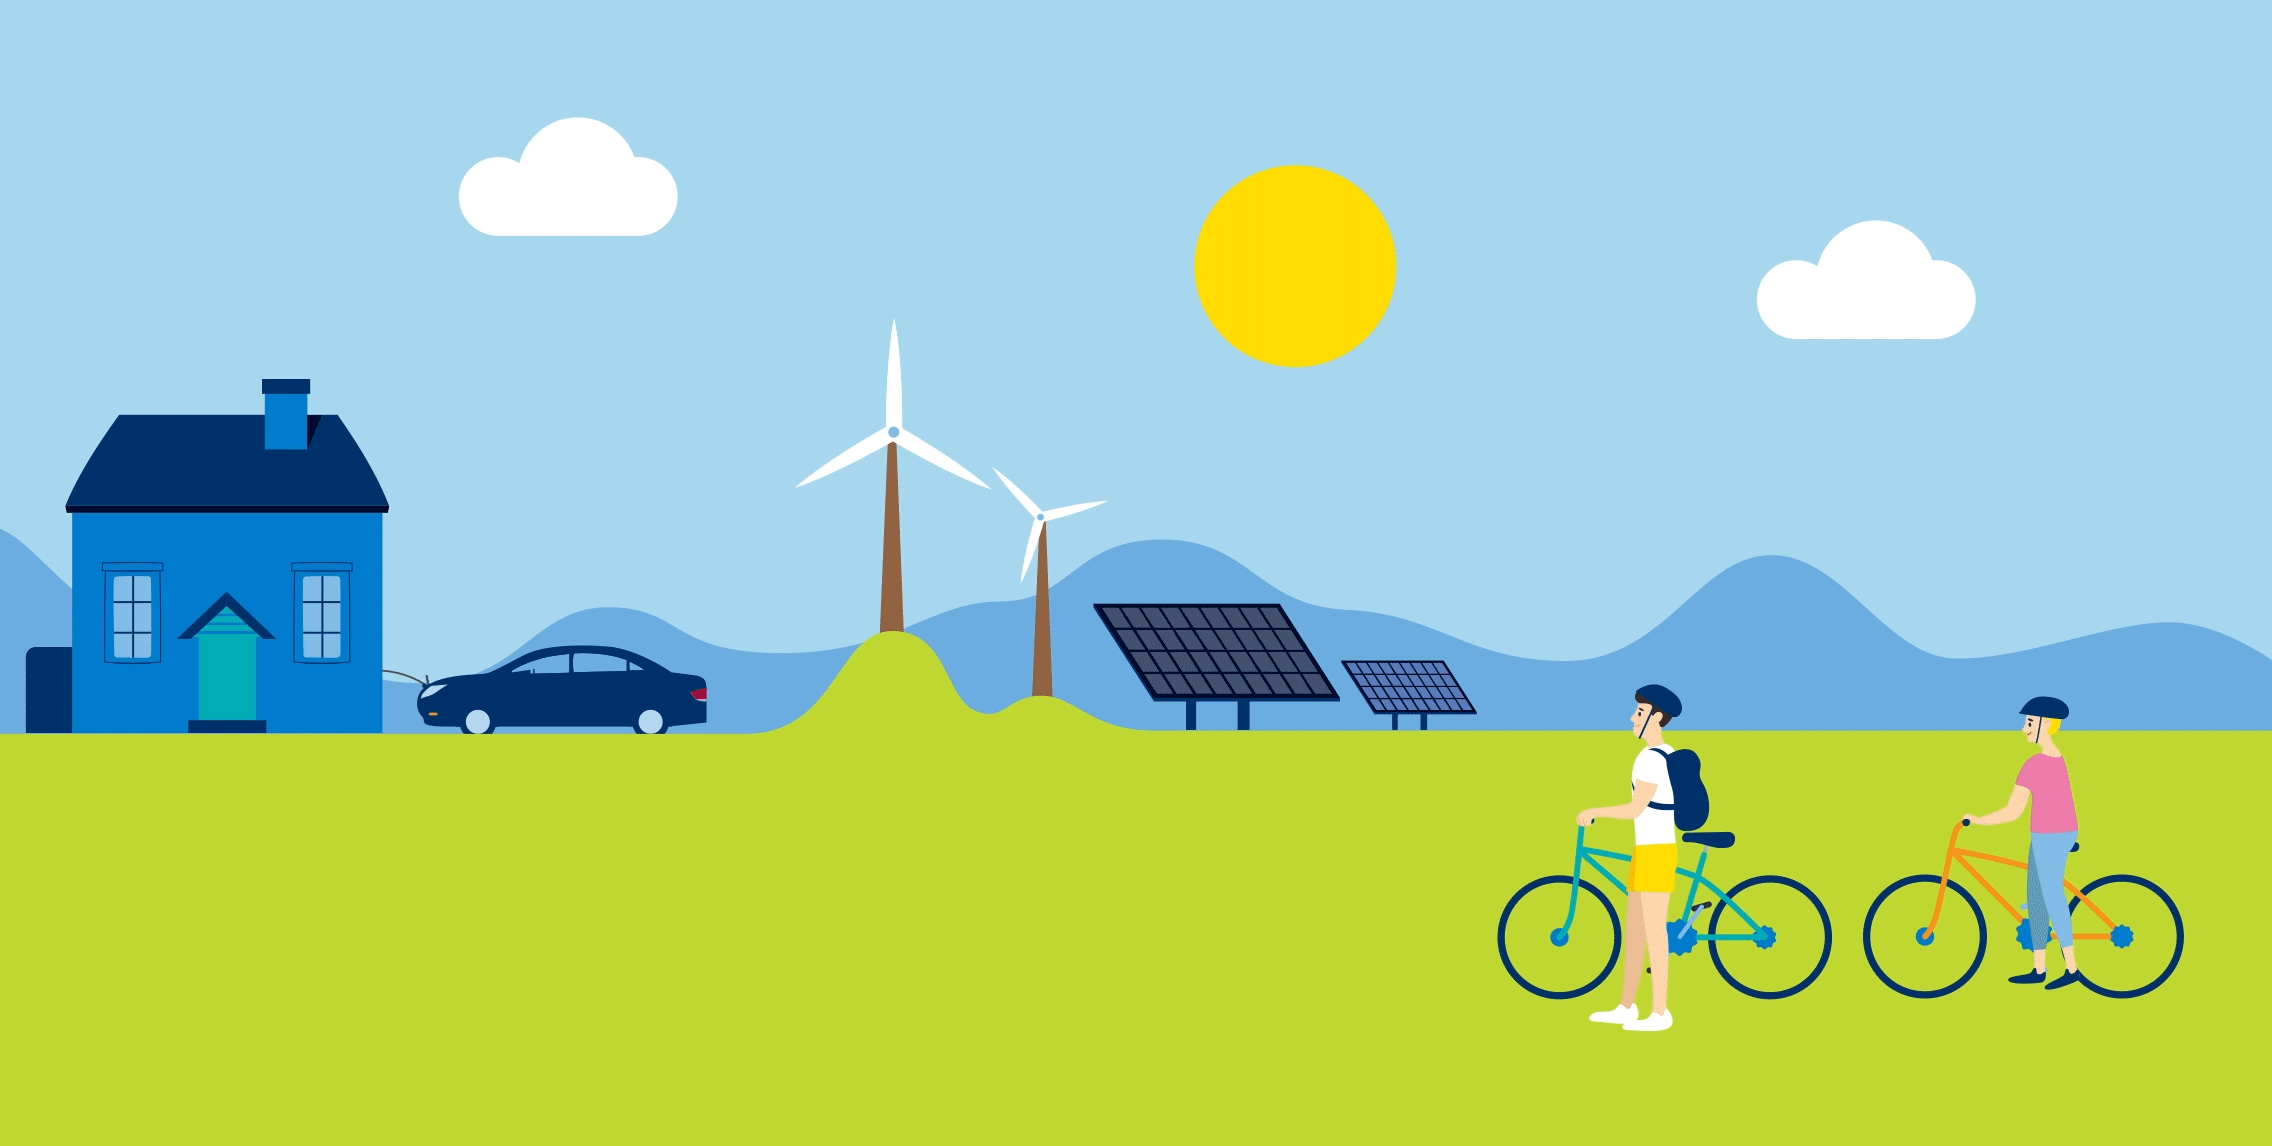 Cartoon of sunny landscape with house, car, windmills, solar panels and cyclists.